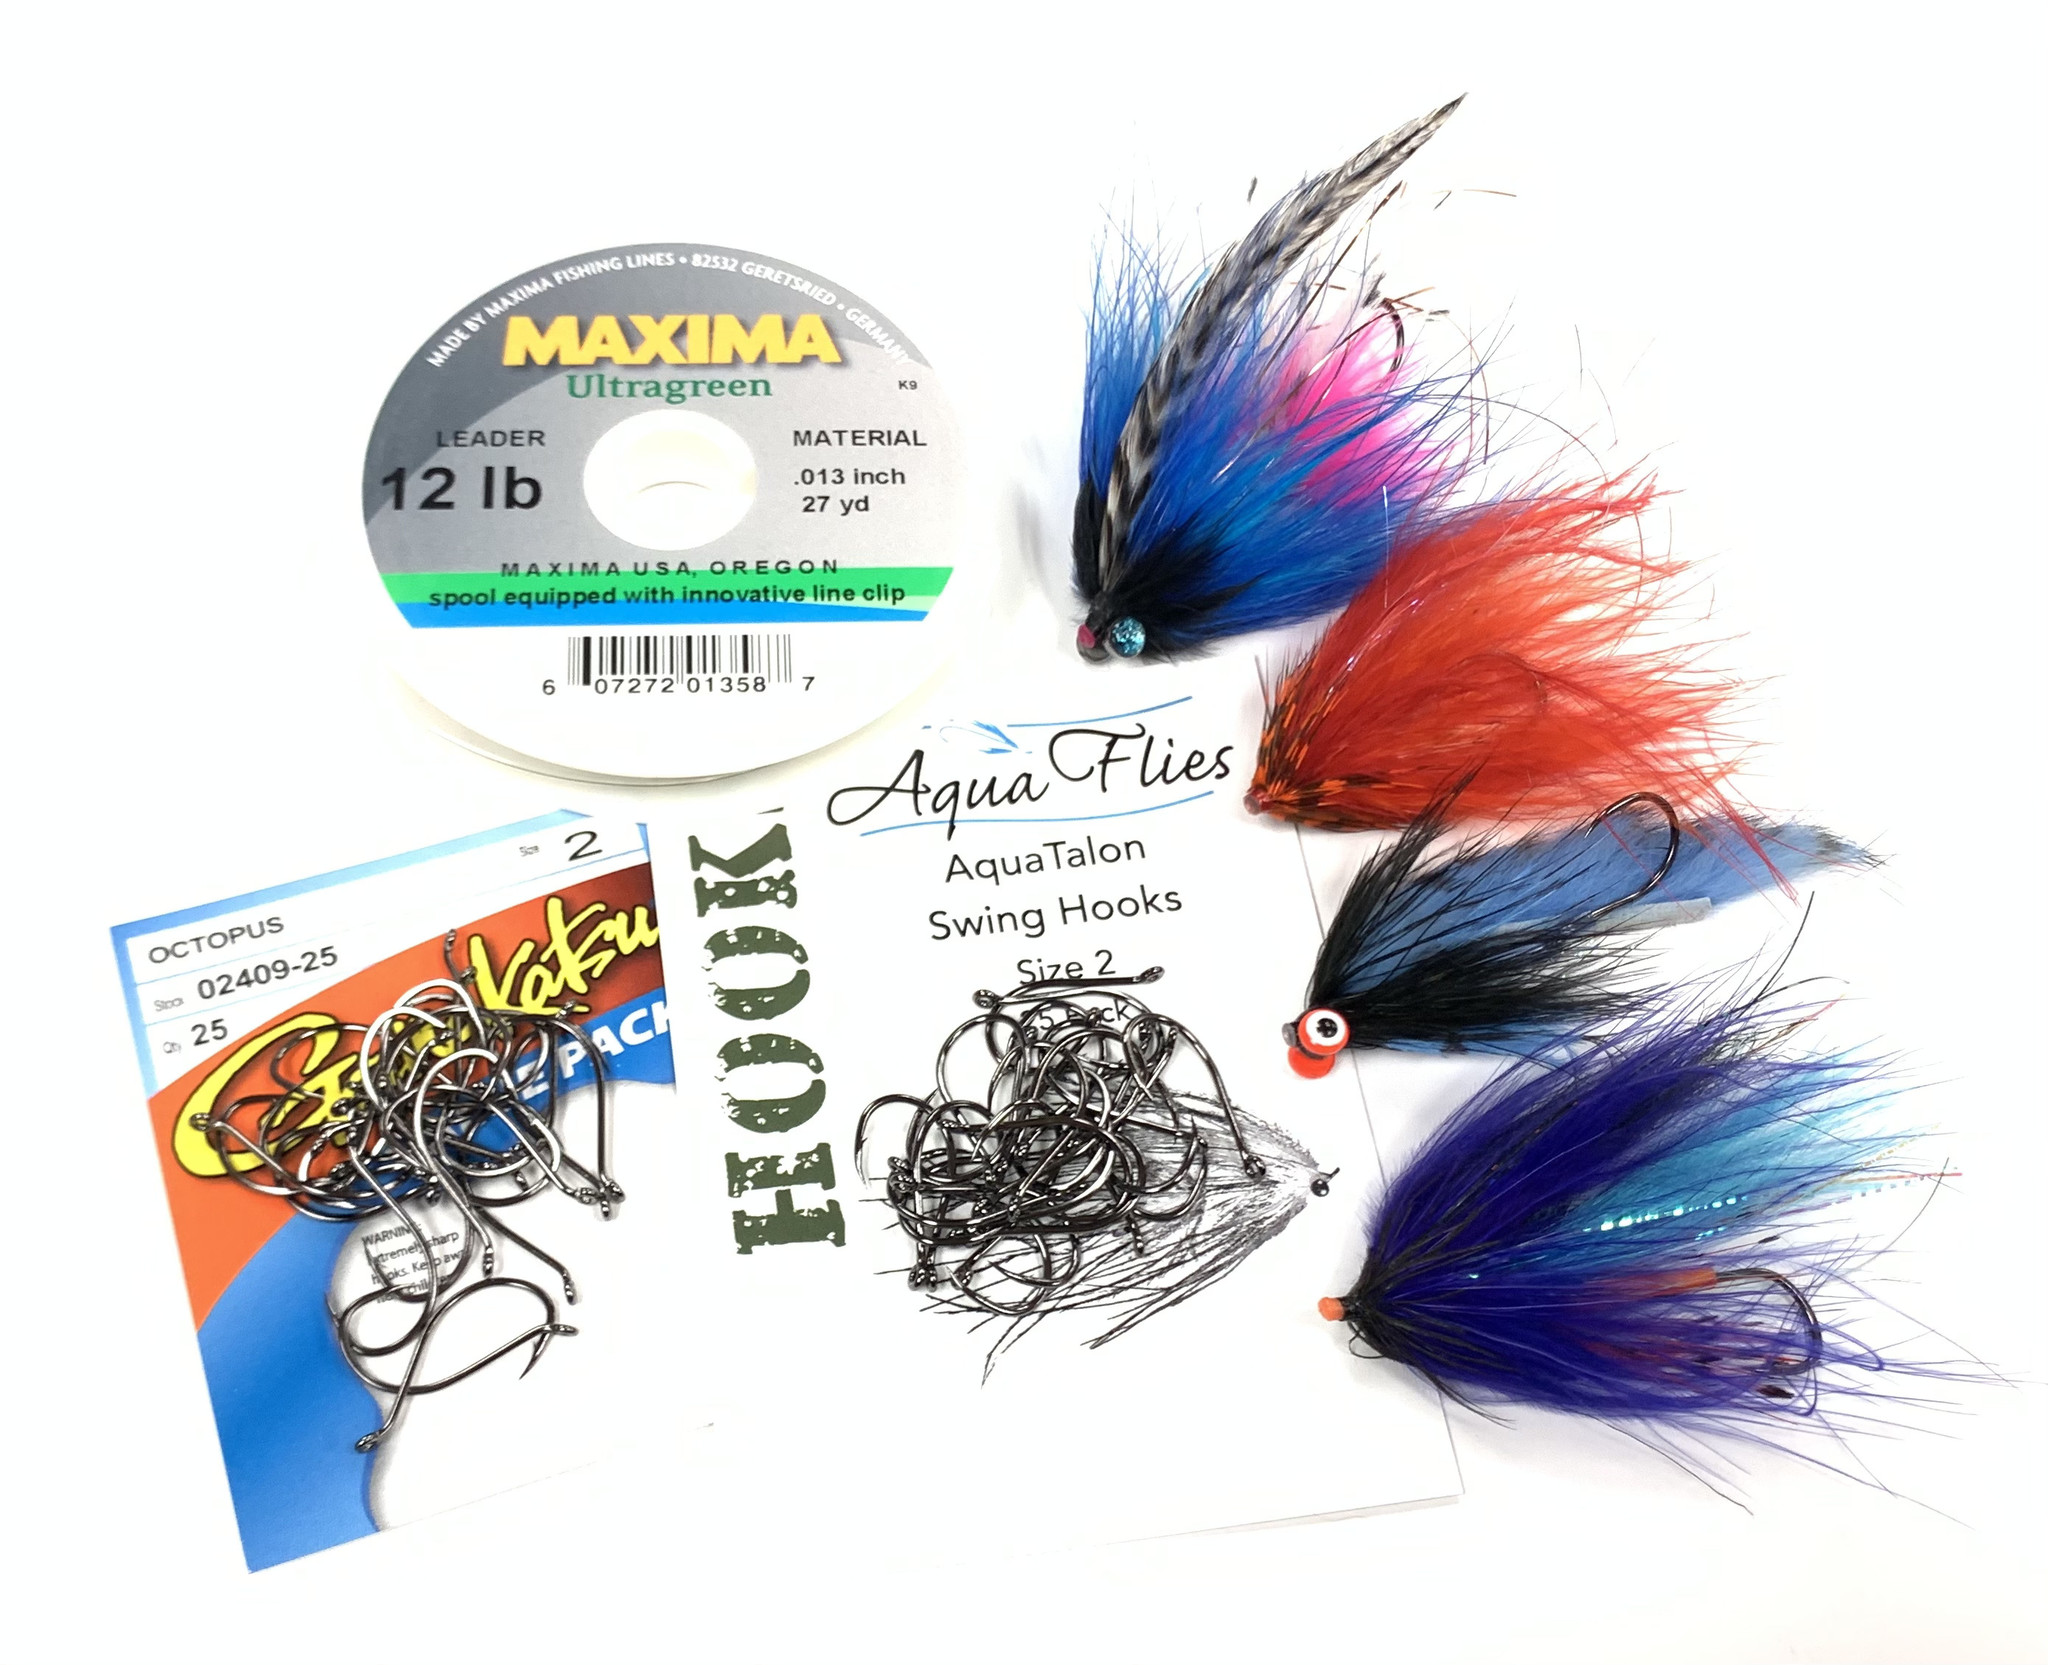 Latest Fly Fishing News and Reports - Rigging Tube Flies - Royal